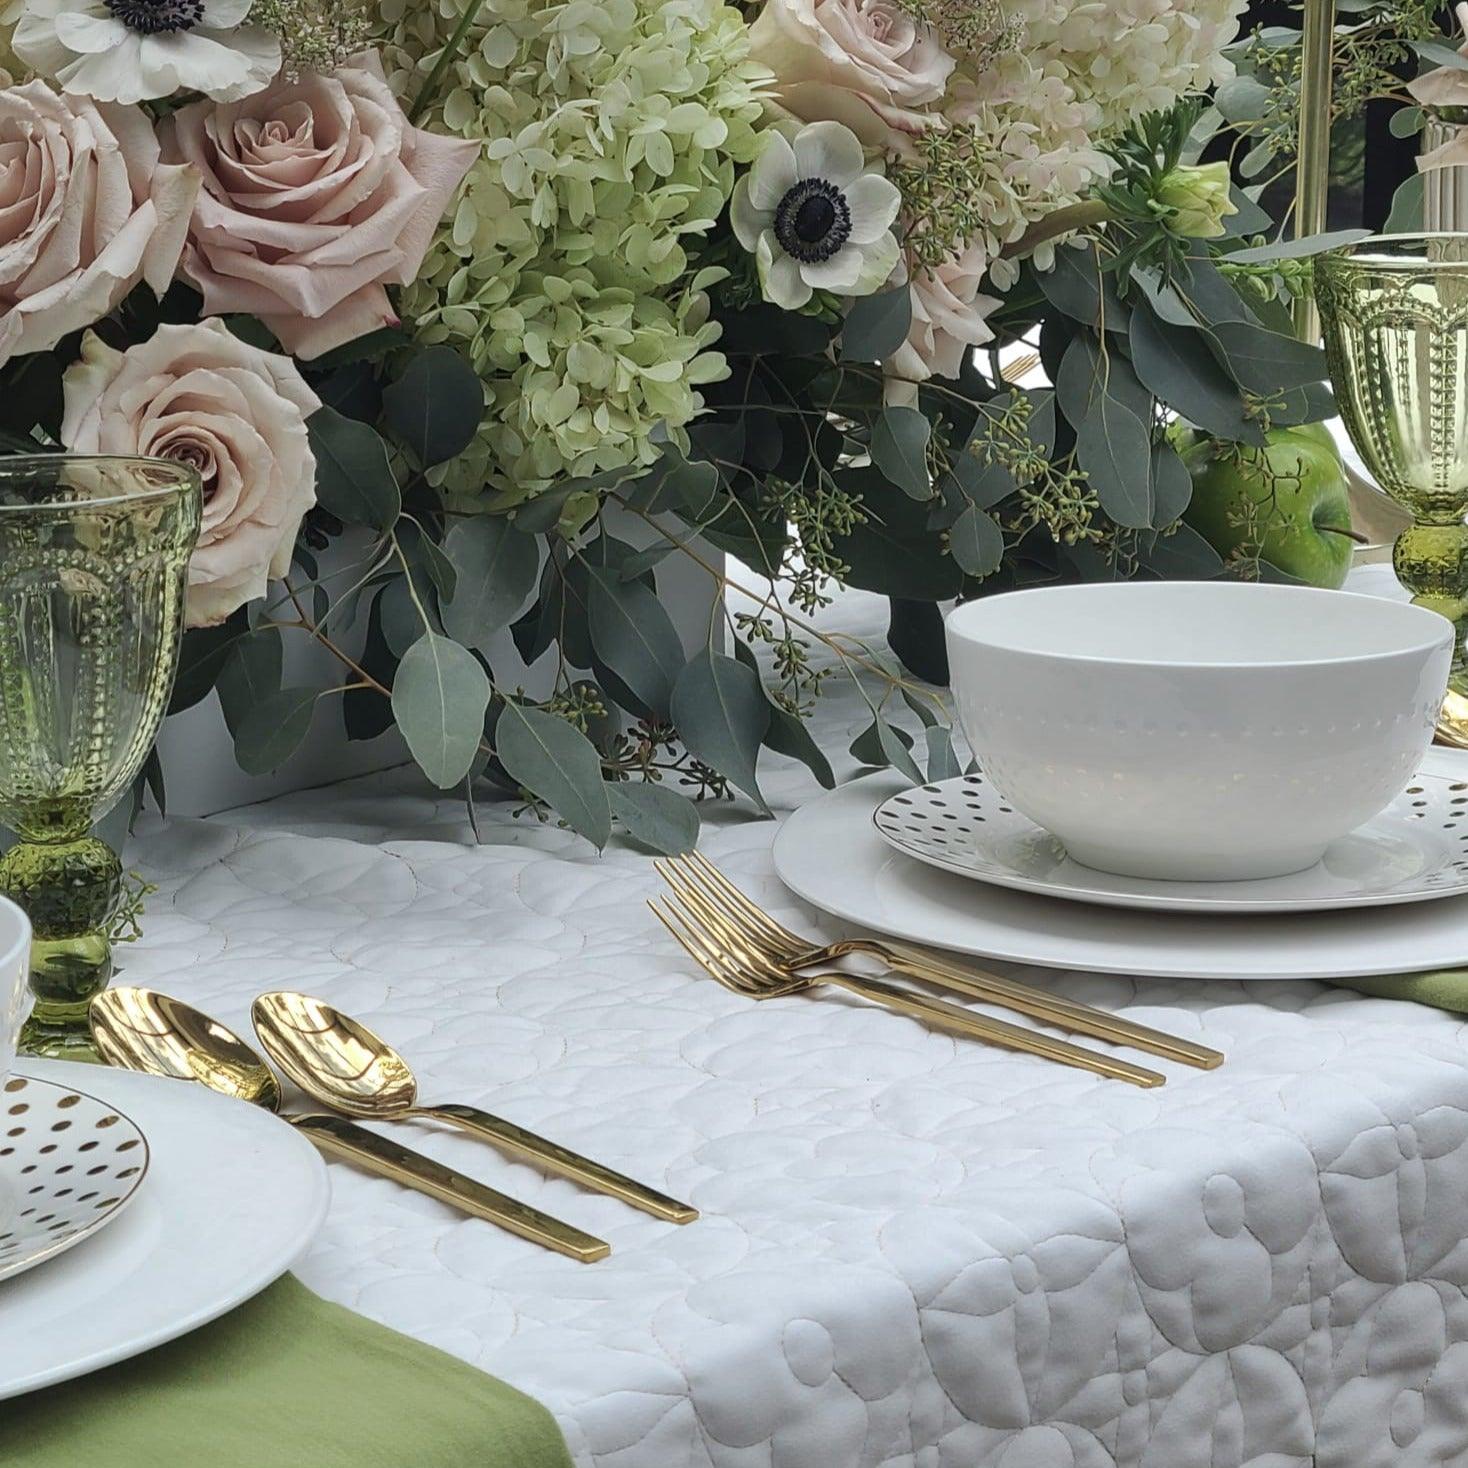 Paloma Quilted Tablecloth - Elegant Linen